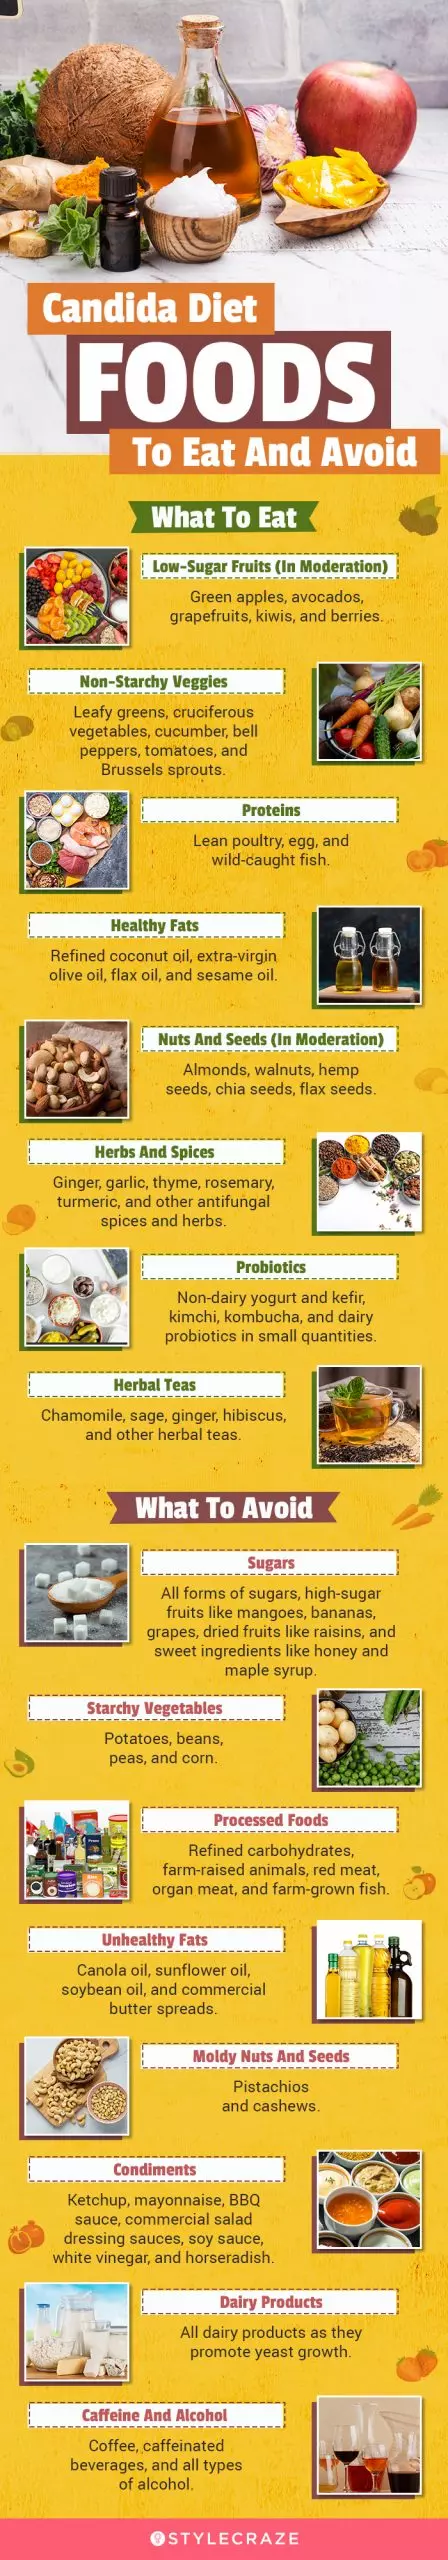 candida diet foods to eat and avoid (infographic)